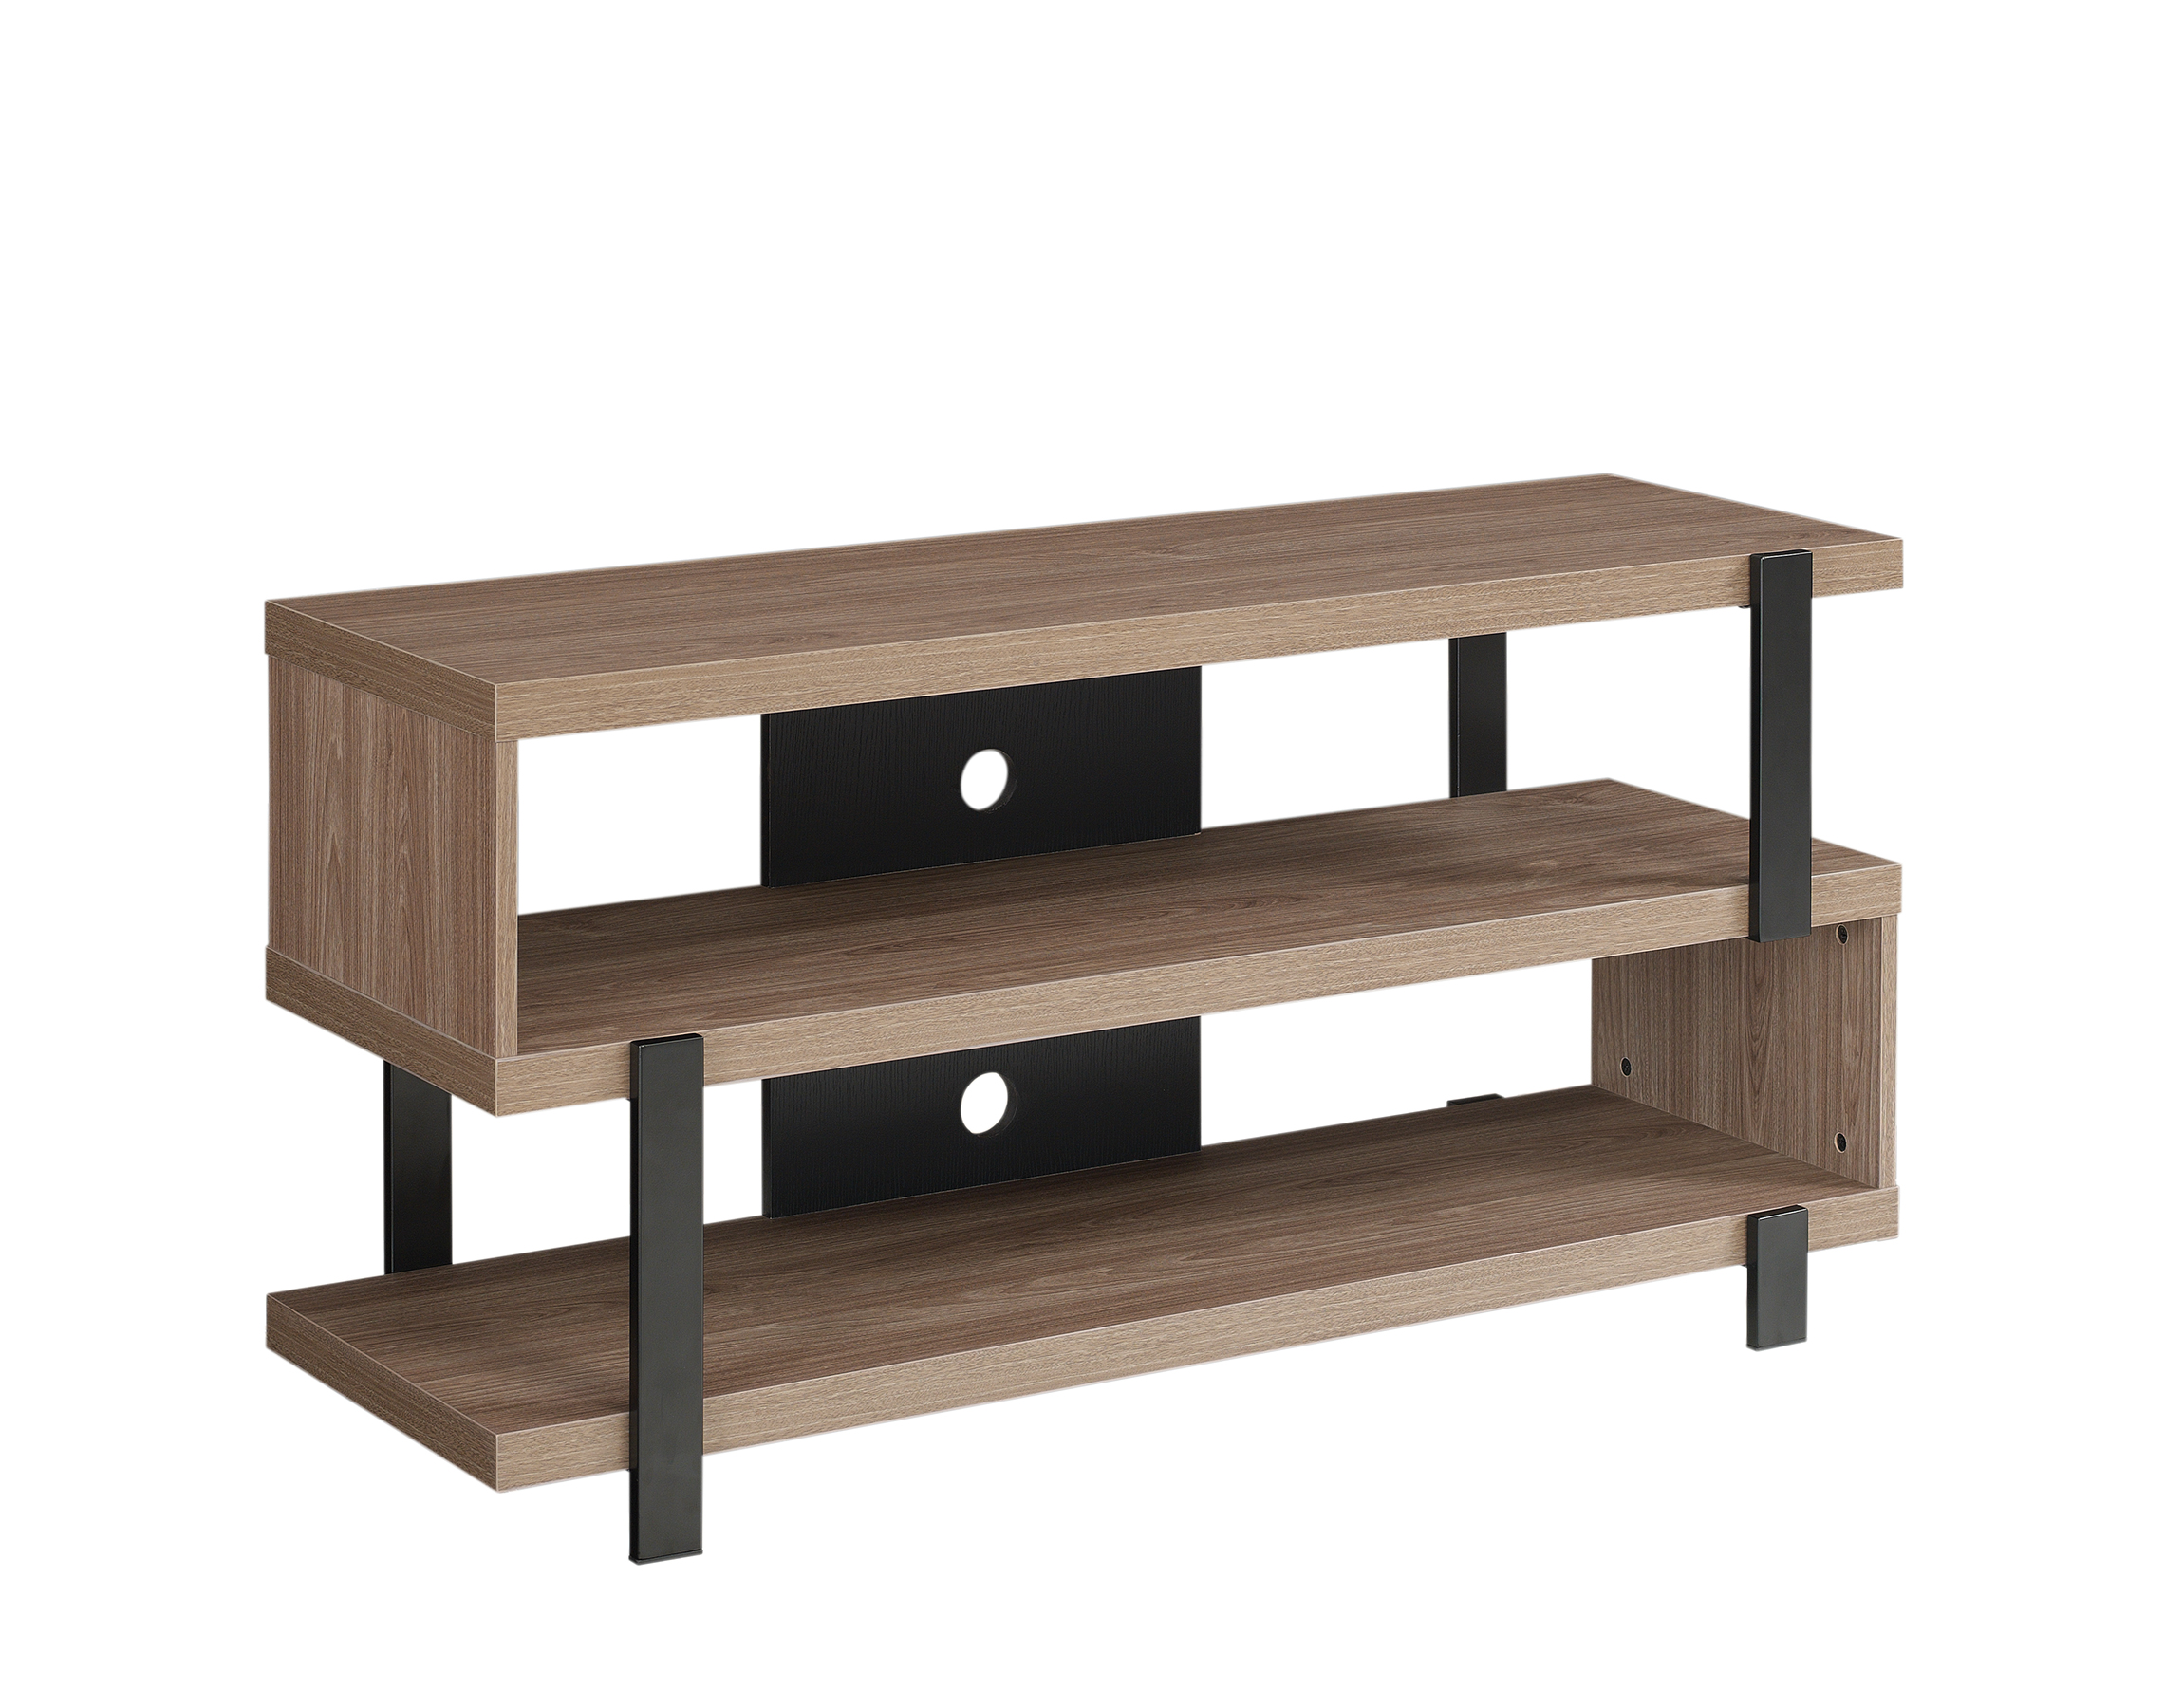 *DNP*Springtown TV Stand for TVs up to 55 inches Screen Size with S-Shape Open Shelves in Oyster Walnut - image 2 of 6